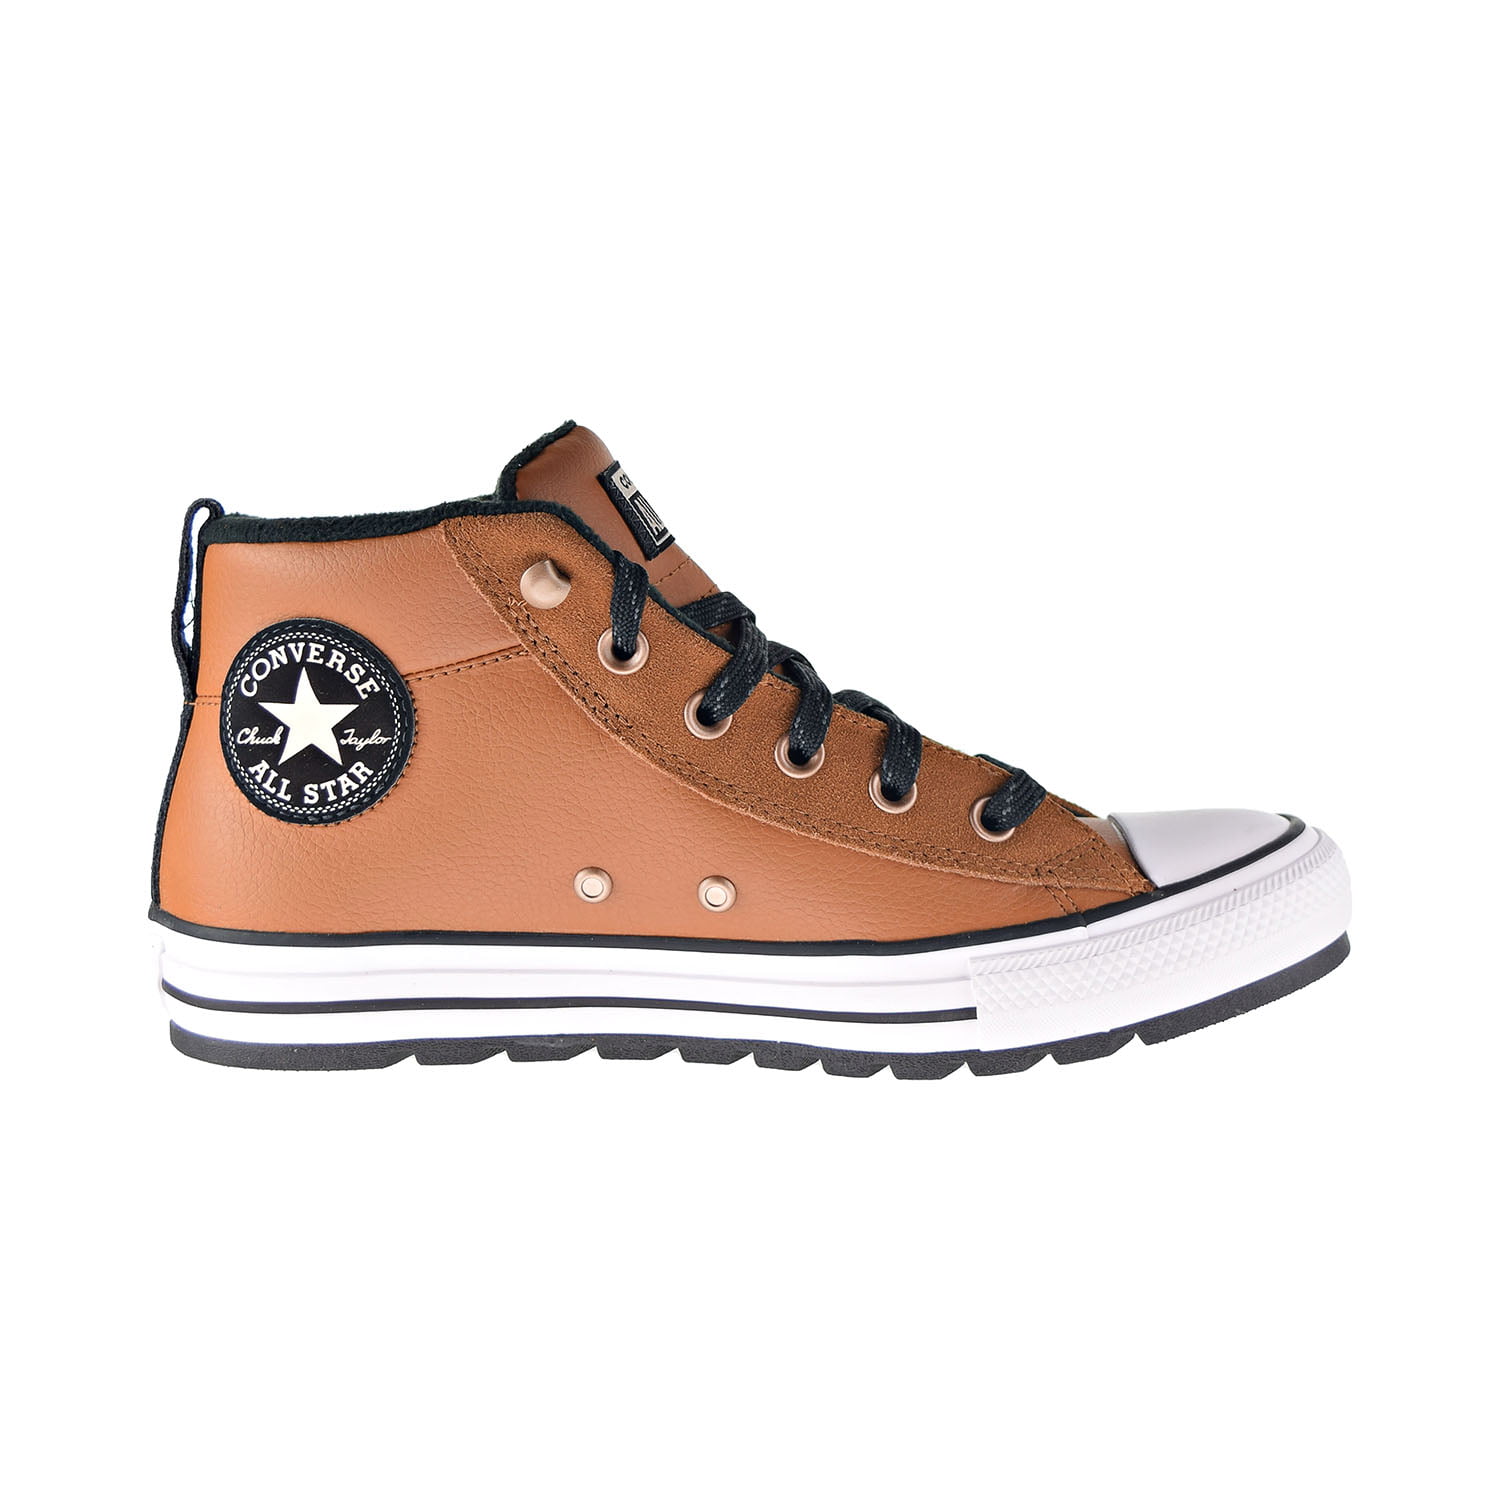 Converse Chuck Taylor All Star Street Leather Mid Top